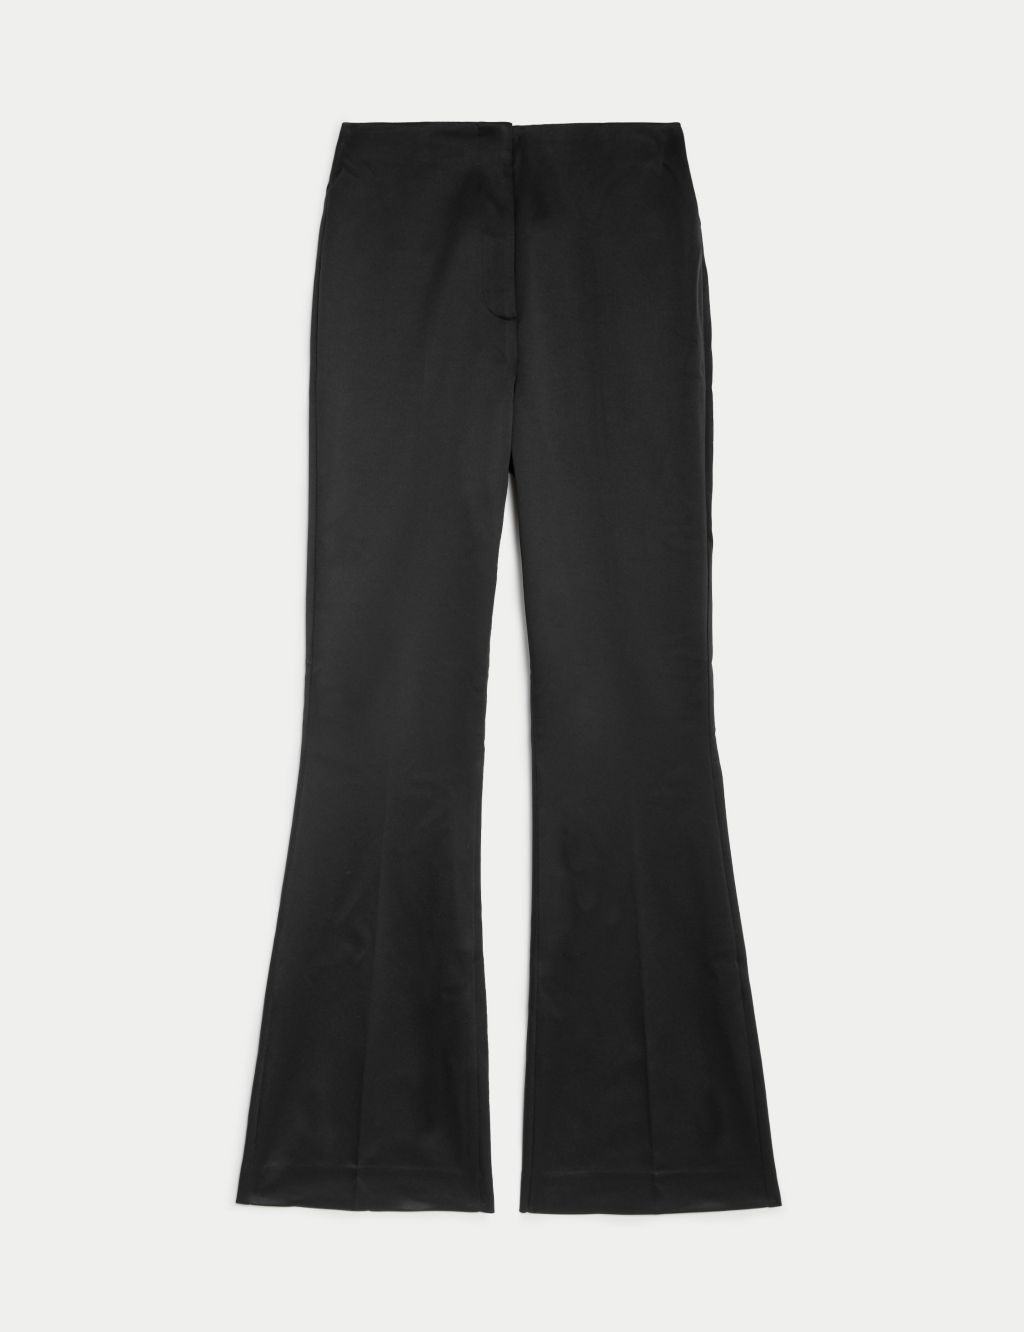 Satin Slim Fit Flare Trousers image 2